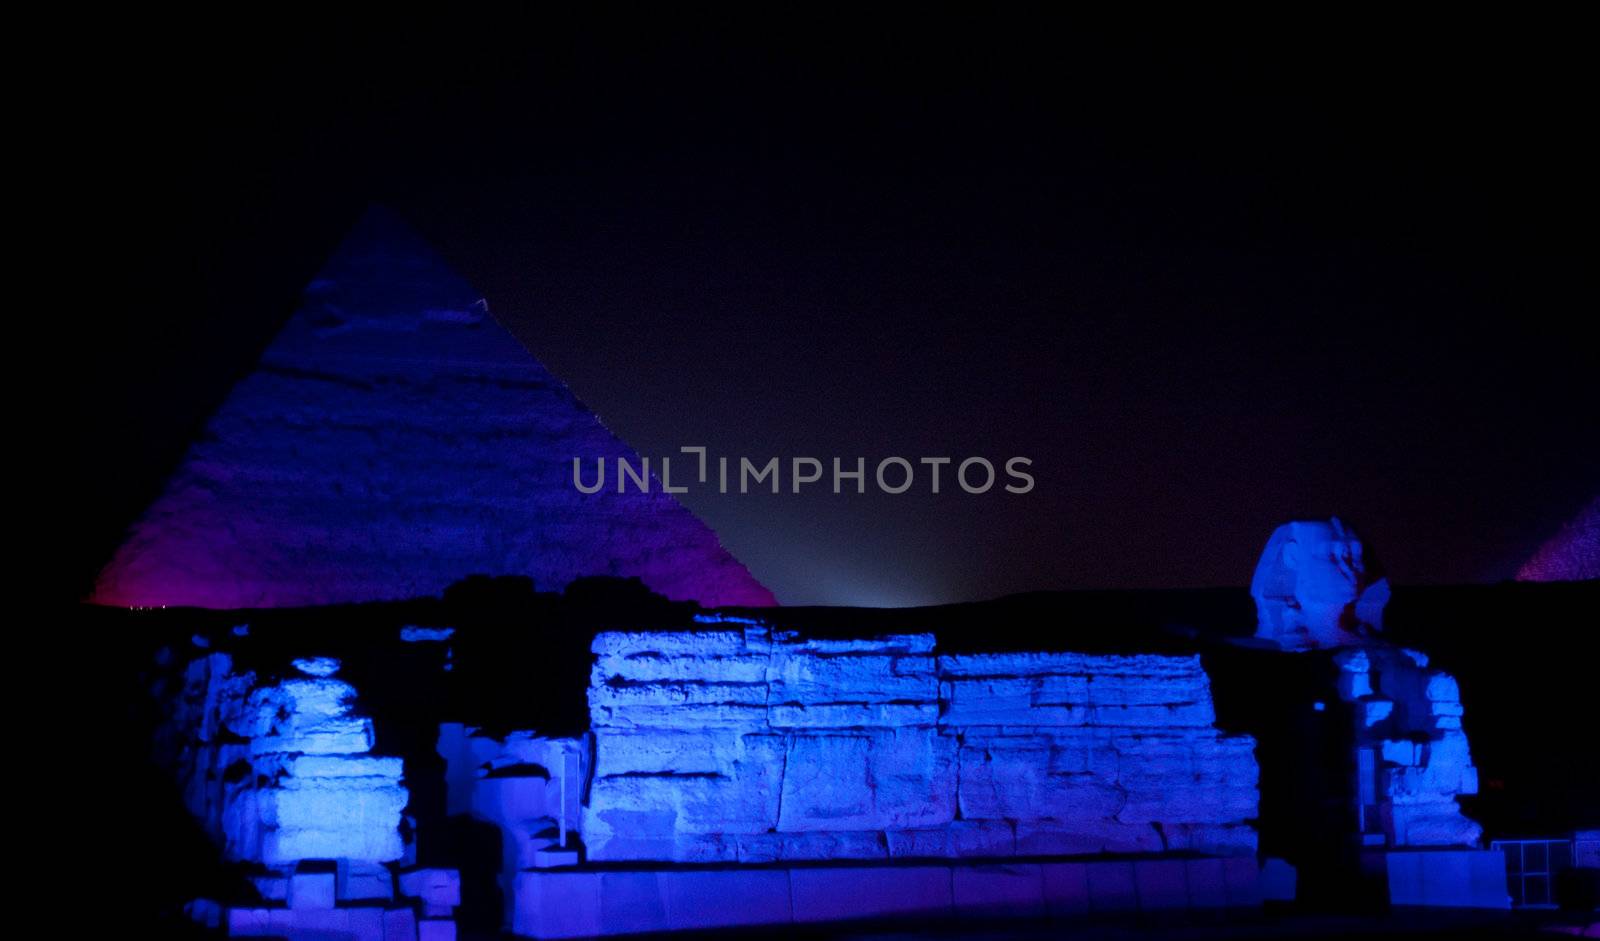 Giza Pyramids and sphinx illuminated by colored lights at night